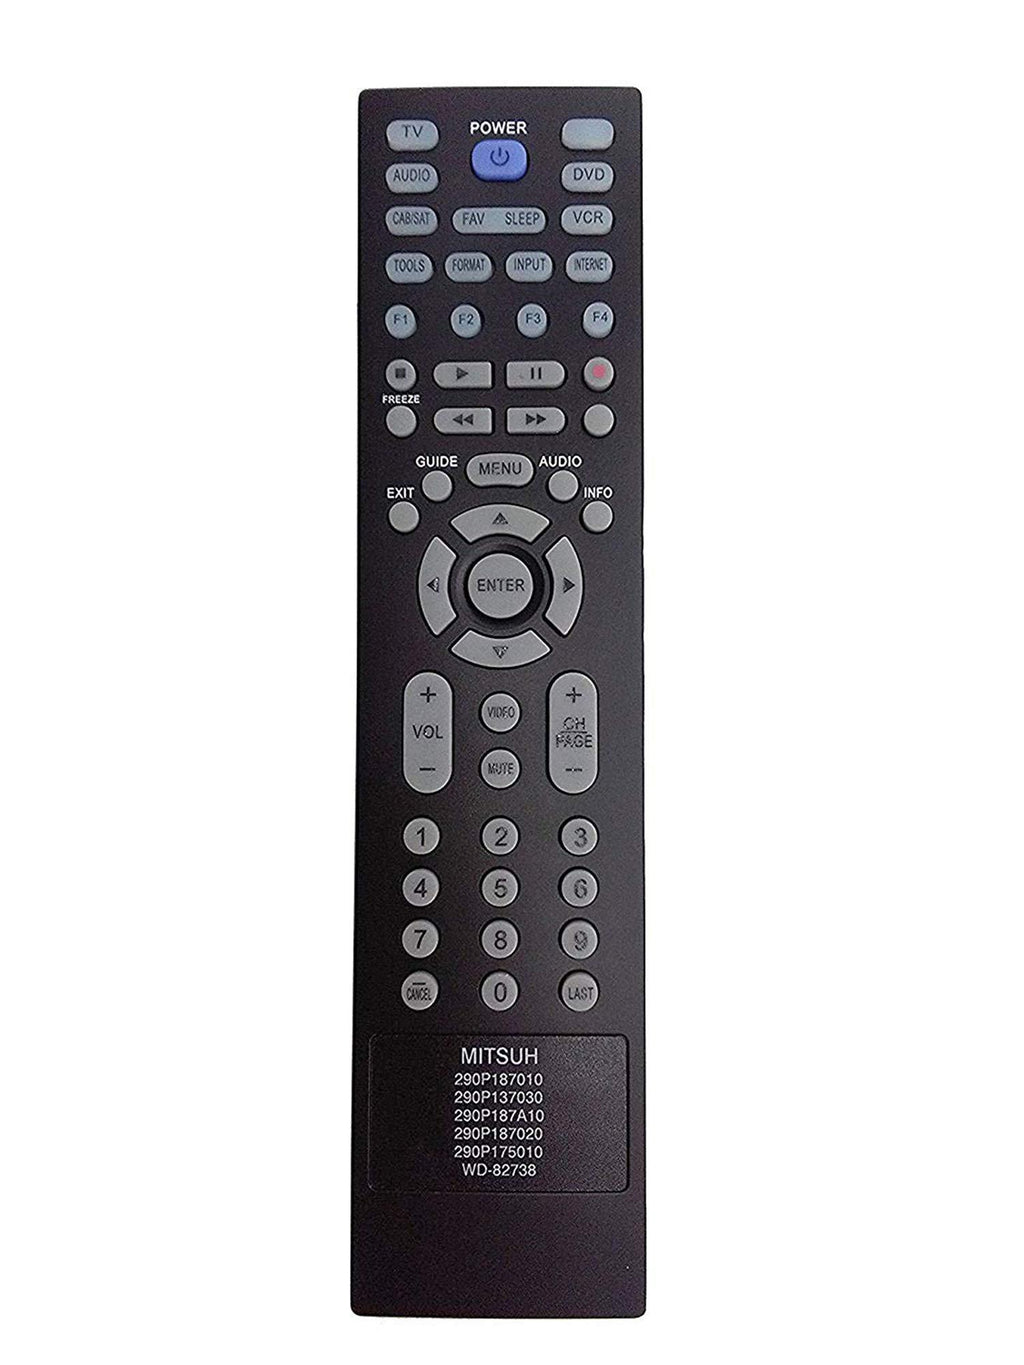 New 290P187A10 290P187010 Replace Remote fit for Mitsubishi TV WD73C10 WD60638 WD65638 WD73638 WD65C10 WD60638CAWD65638CA WD60C10 WD-60638 WD-60638CA WD-60638 WD-60638CA WD-60C10 WD-65638 WD-65638CA